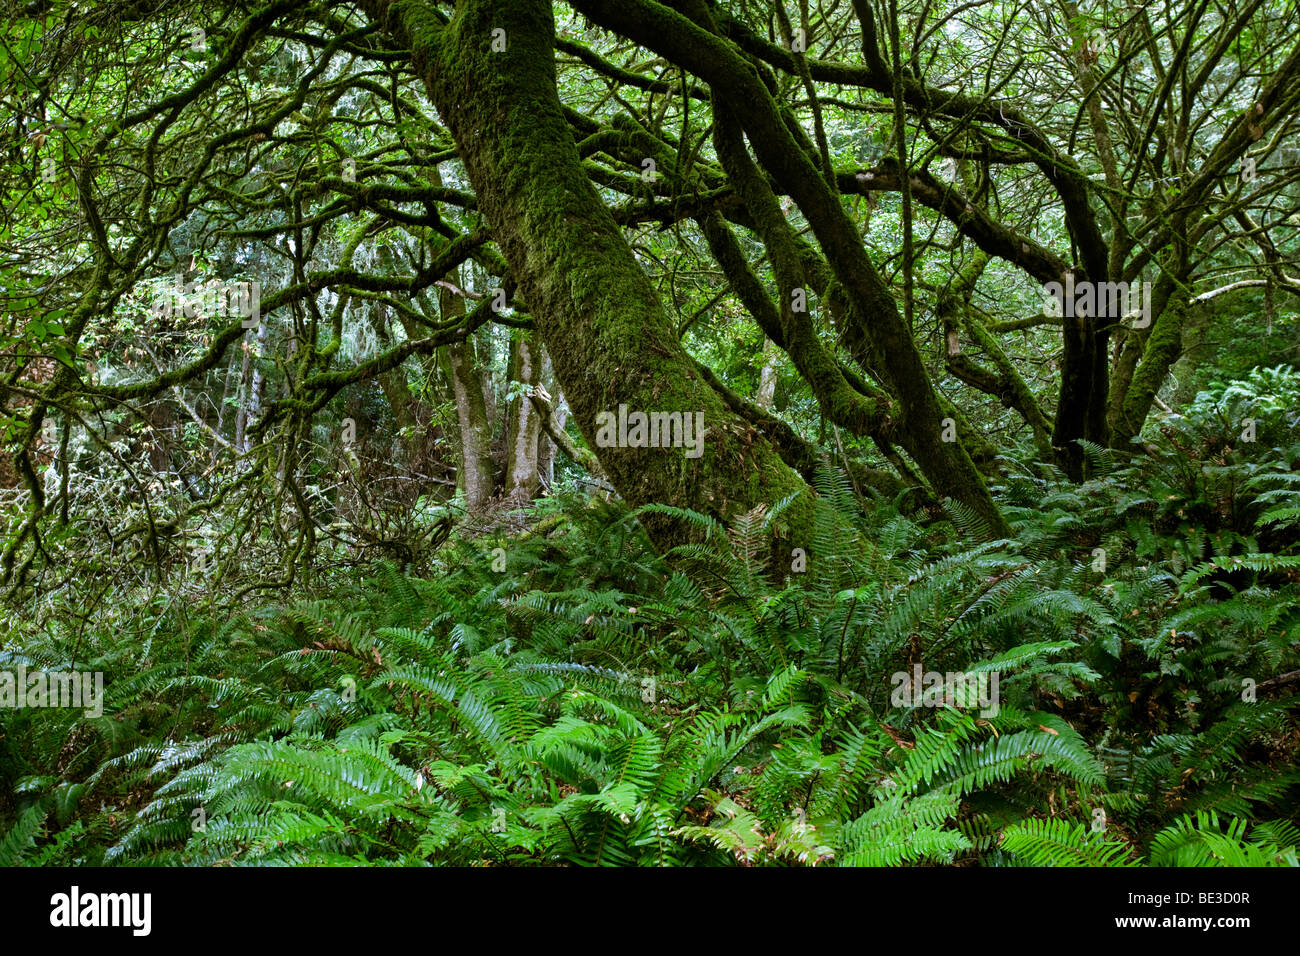 Forest of  Coast Live Oak (Quercus agrifolia) and fern, Point Reyes National Seashore, California, USA Stock Photo